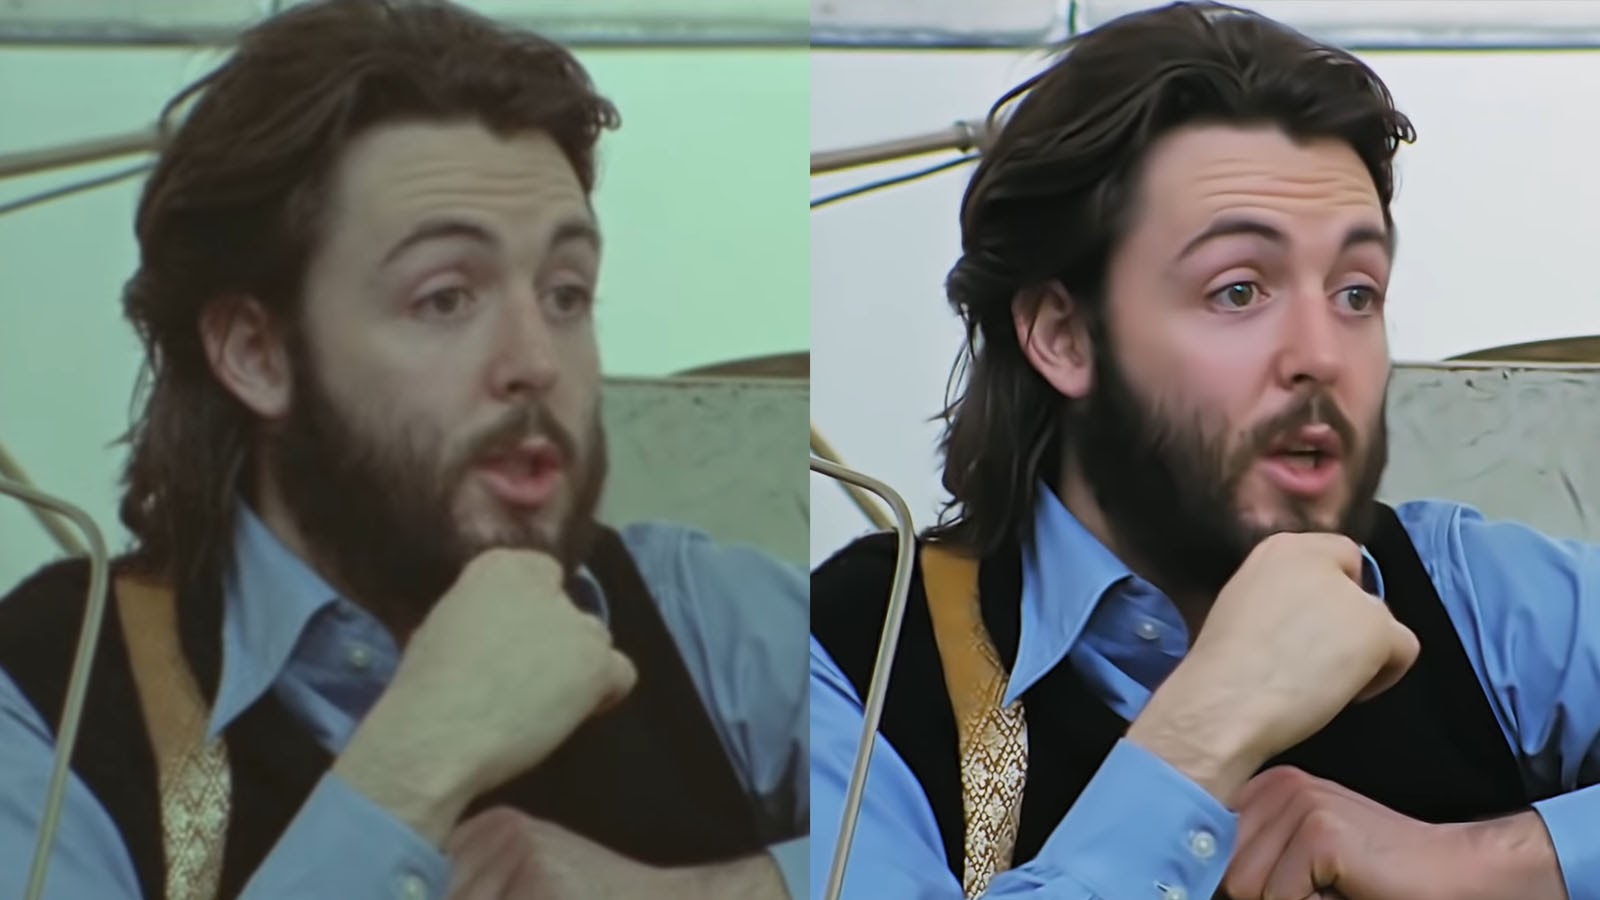 An example of the remarkable transformation from the original footage to the restored material used in The Beatles: Get Back. Image © Disney Studios